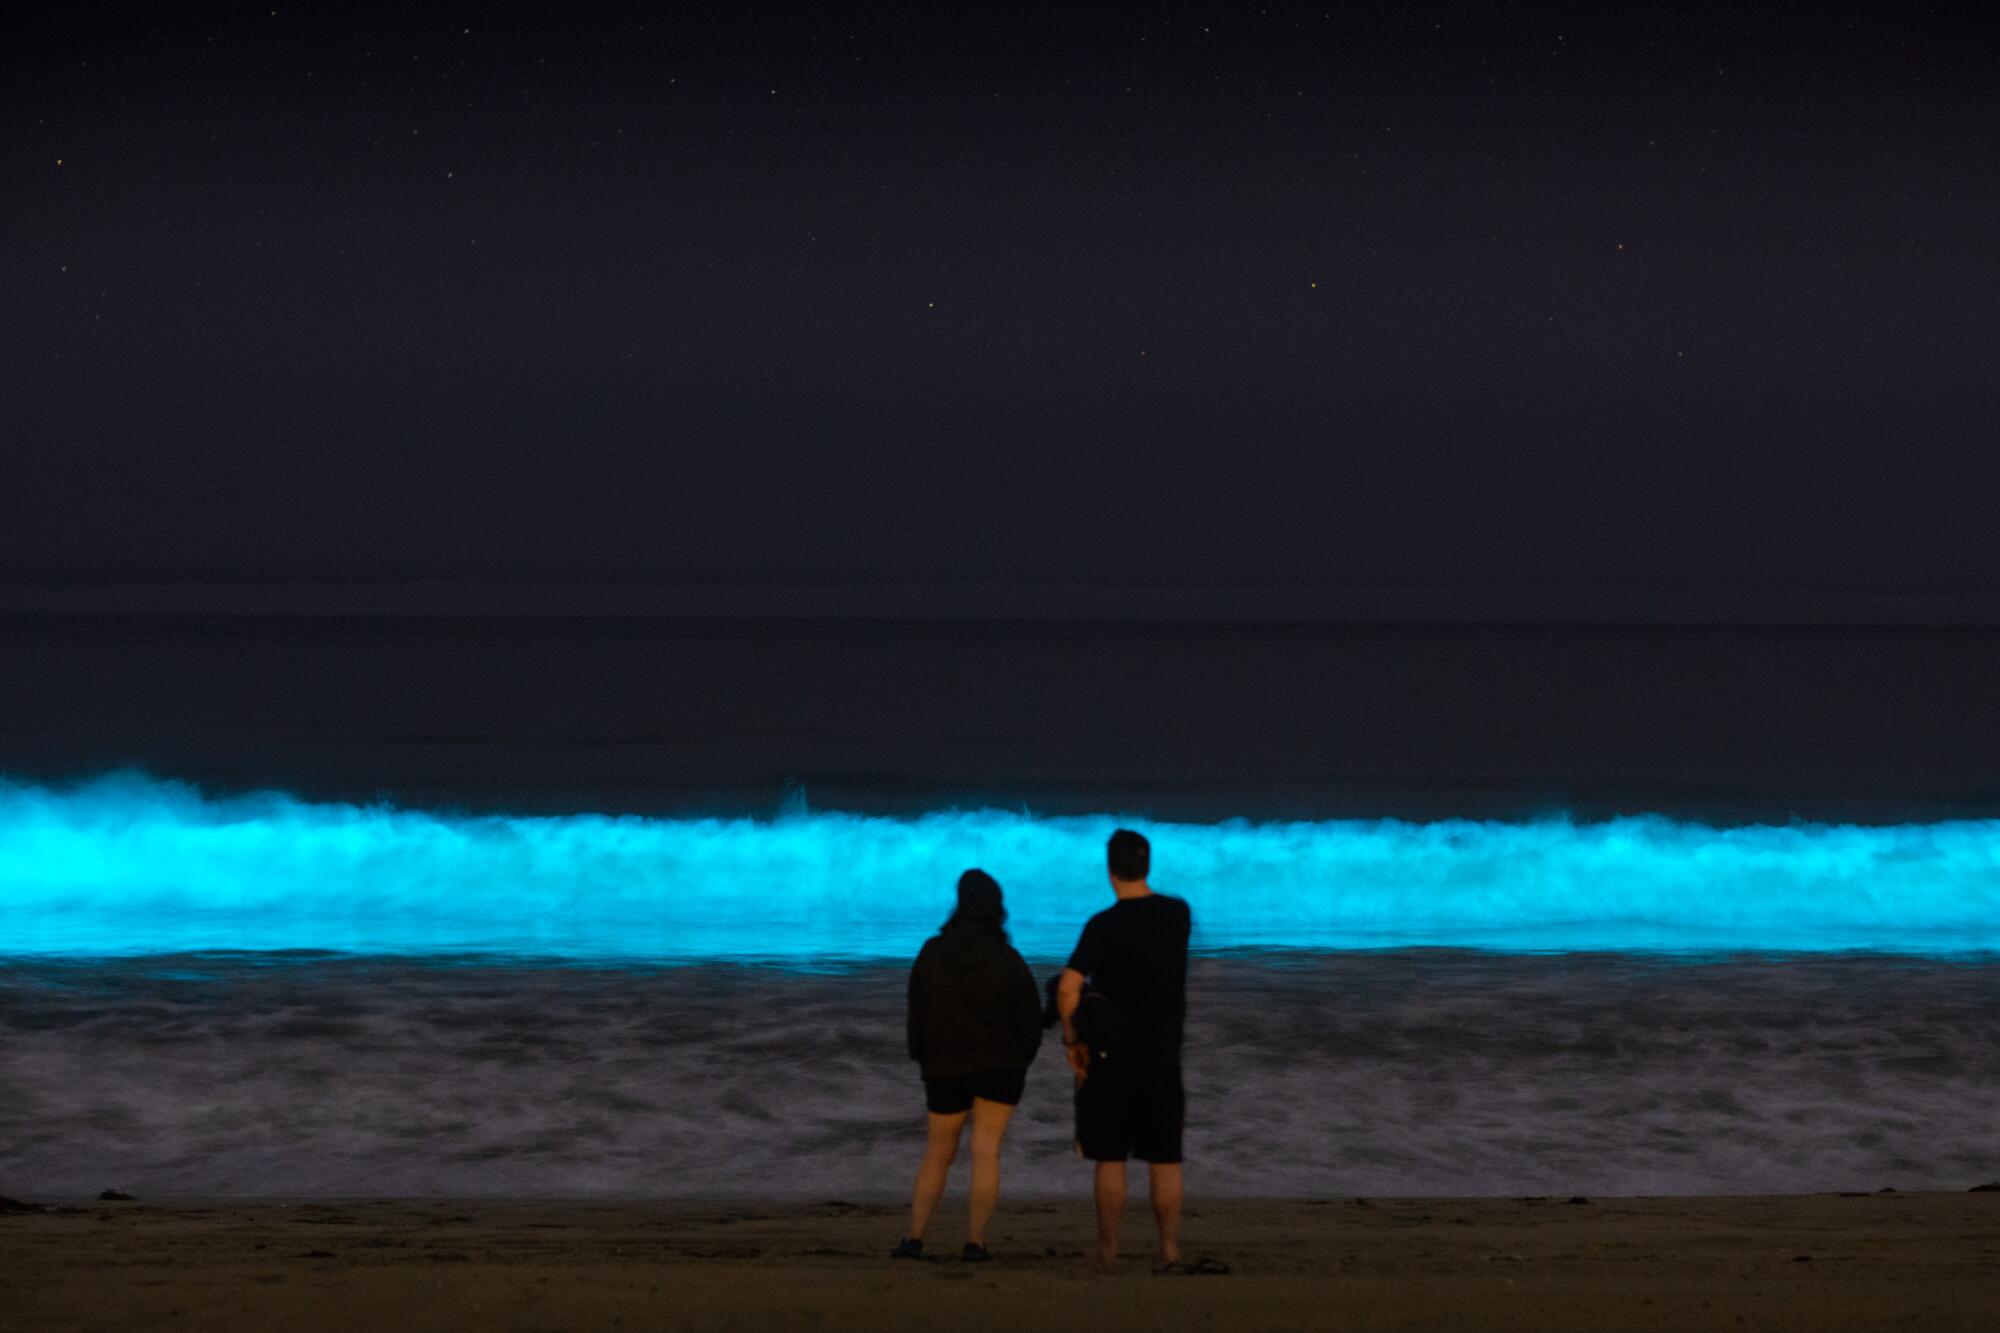 Video, photos show glowing blue waves in the South Bay - Los